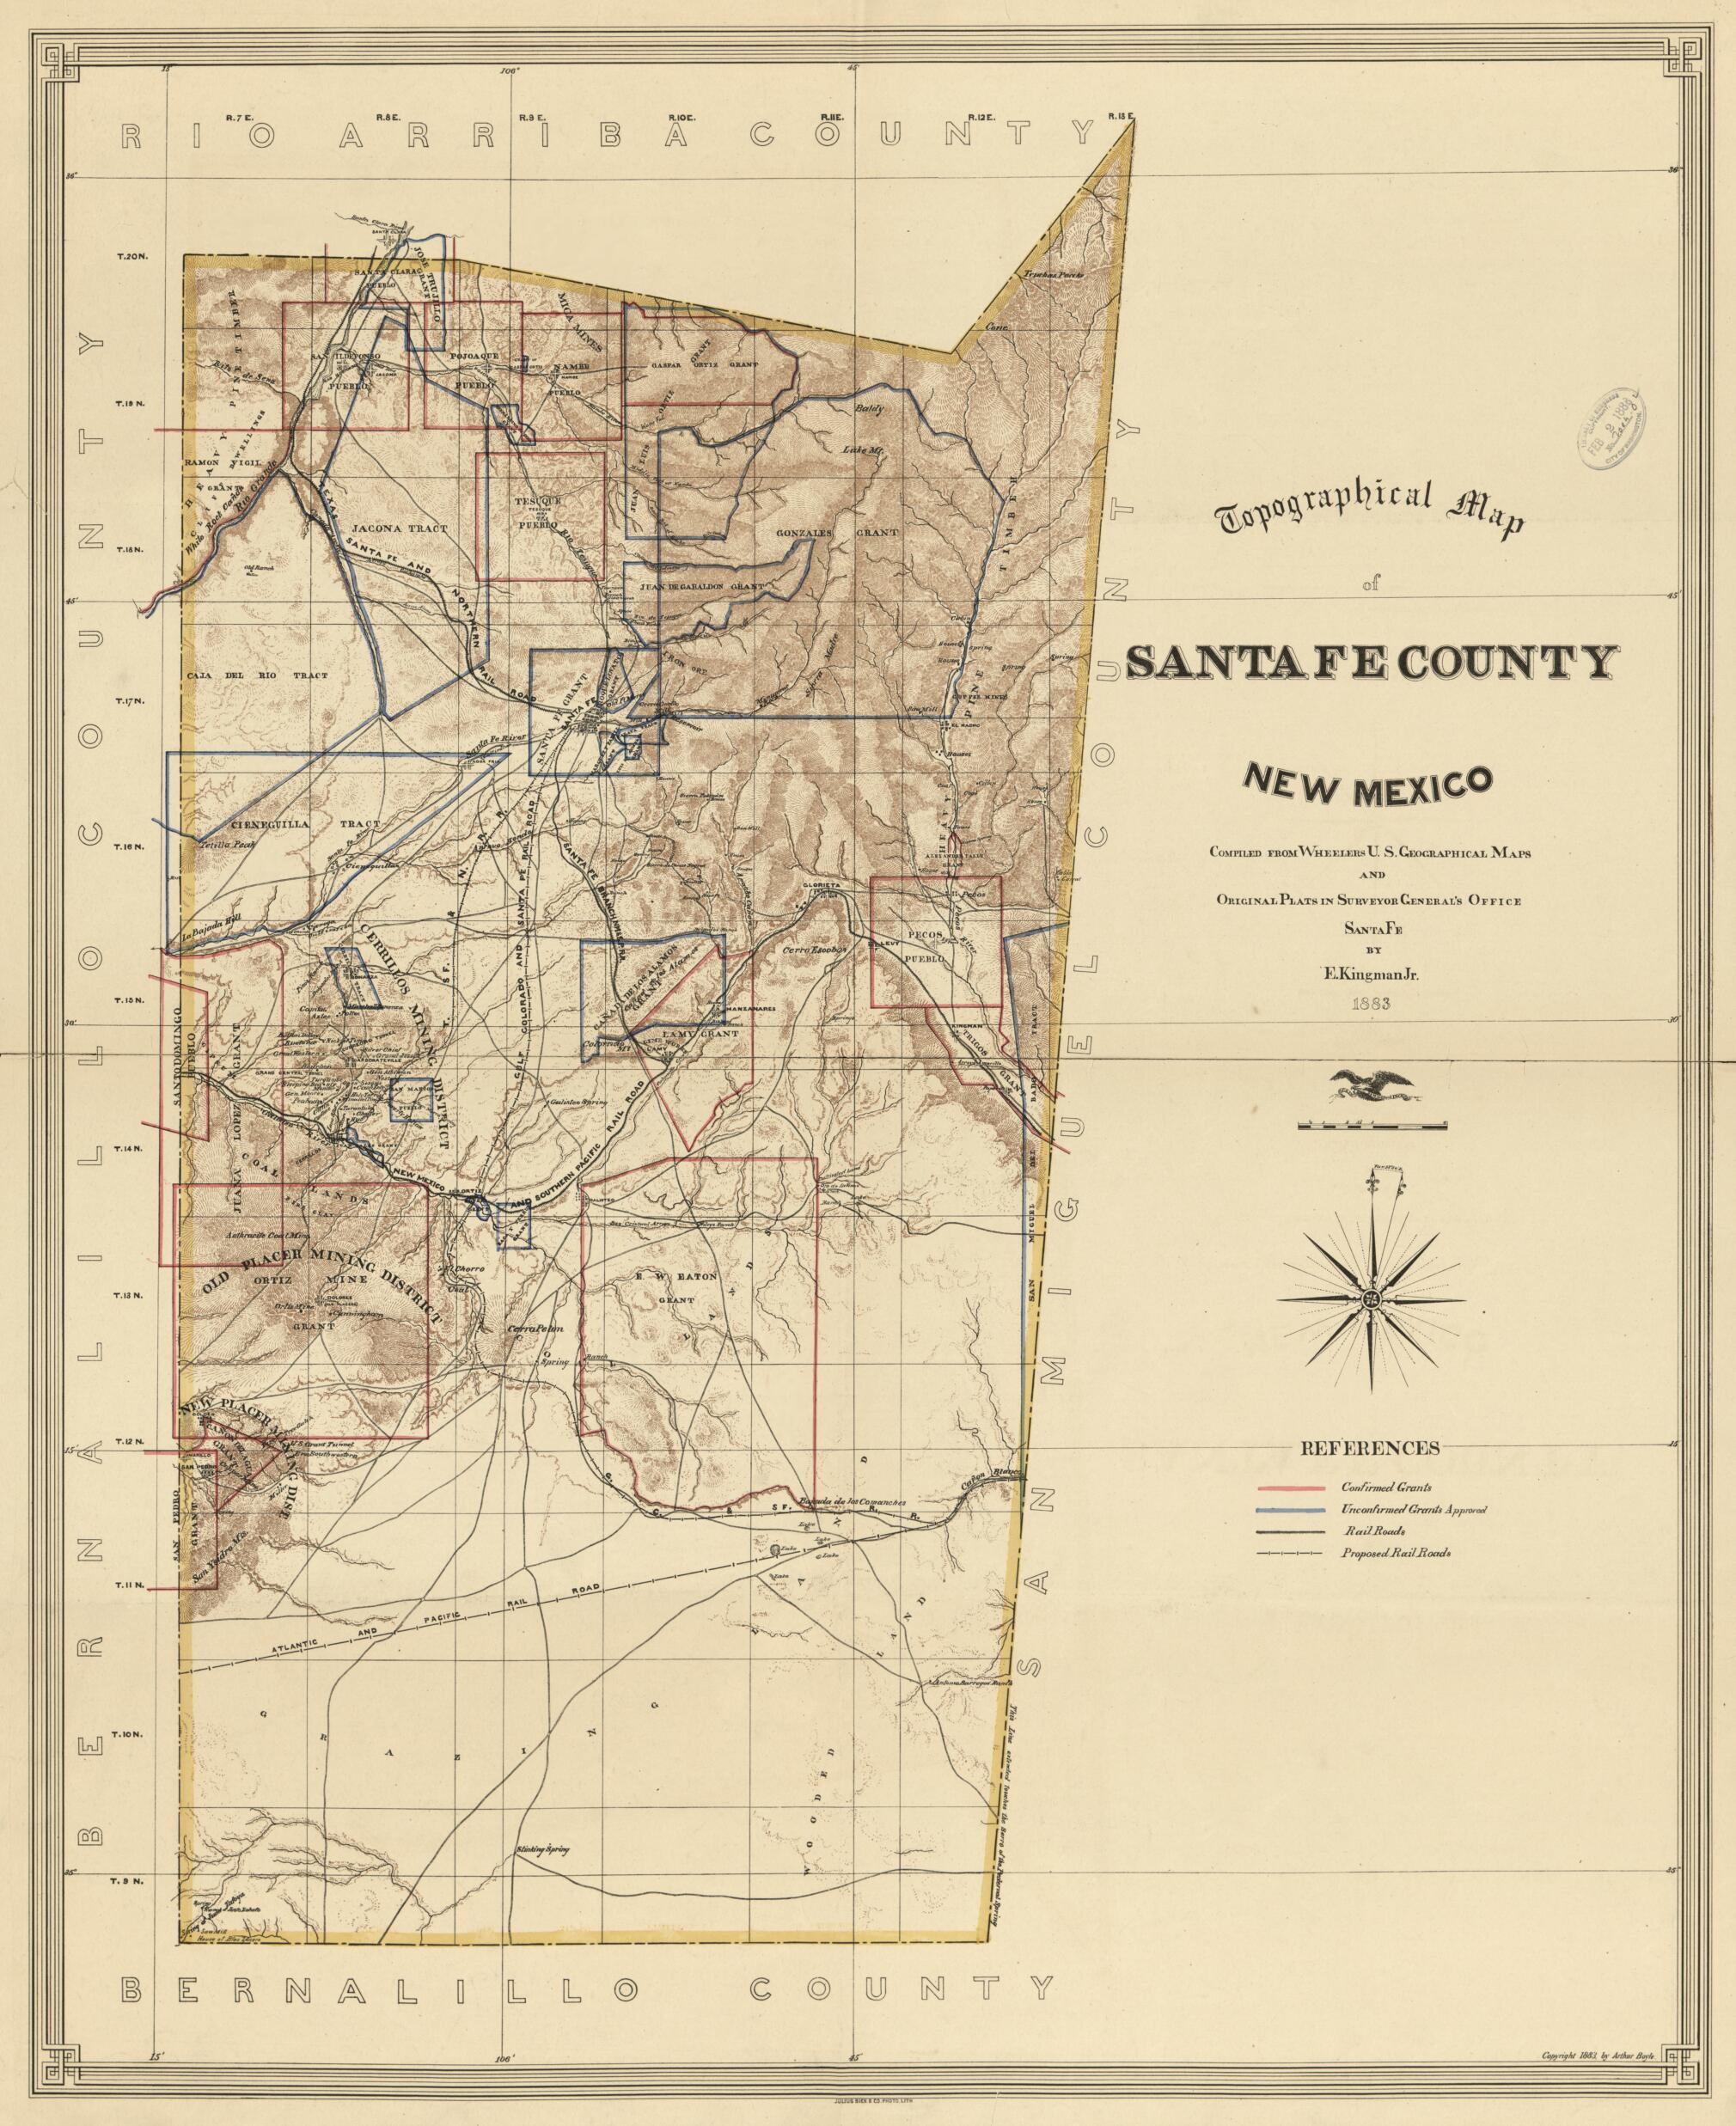 This old map of Topographical Map of Santa Fe County, New Mexico from 1883 was created by E. Kingman in 1883